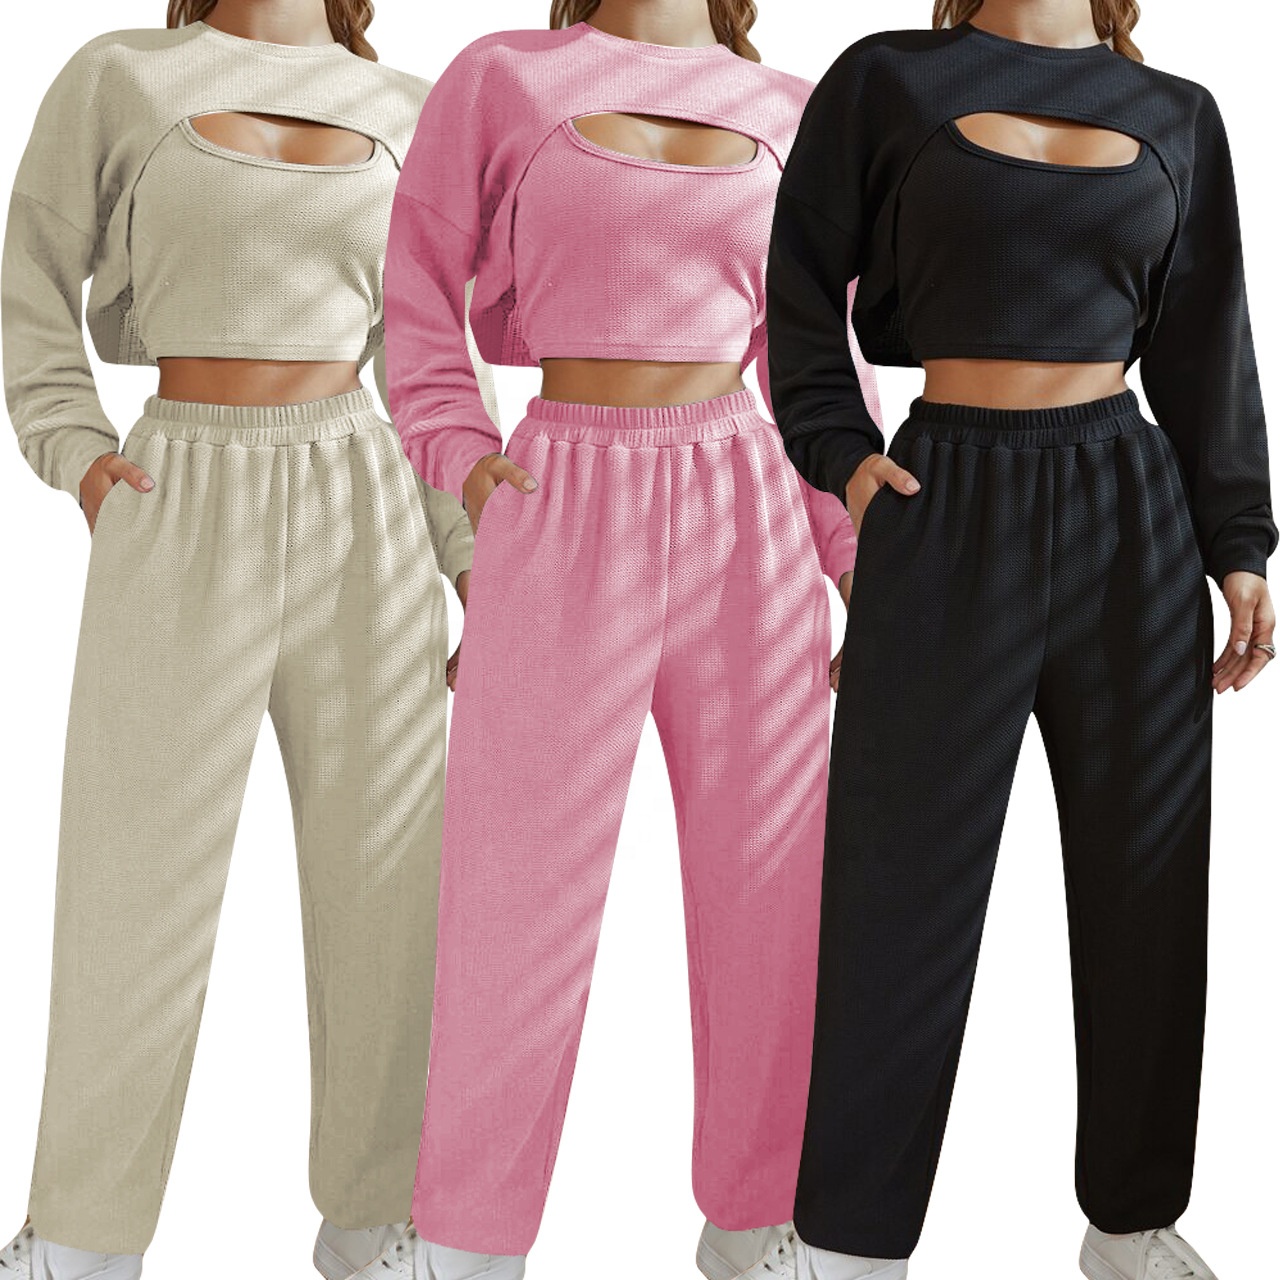 Top sell 3 piece jogging sets walf checks sport wear tracksuits fashion sexy sweat suit for women female ladies